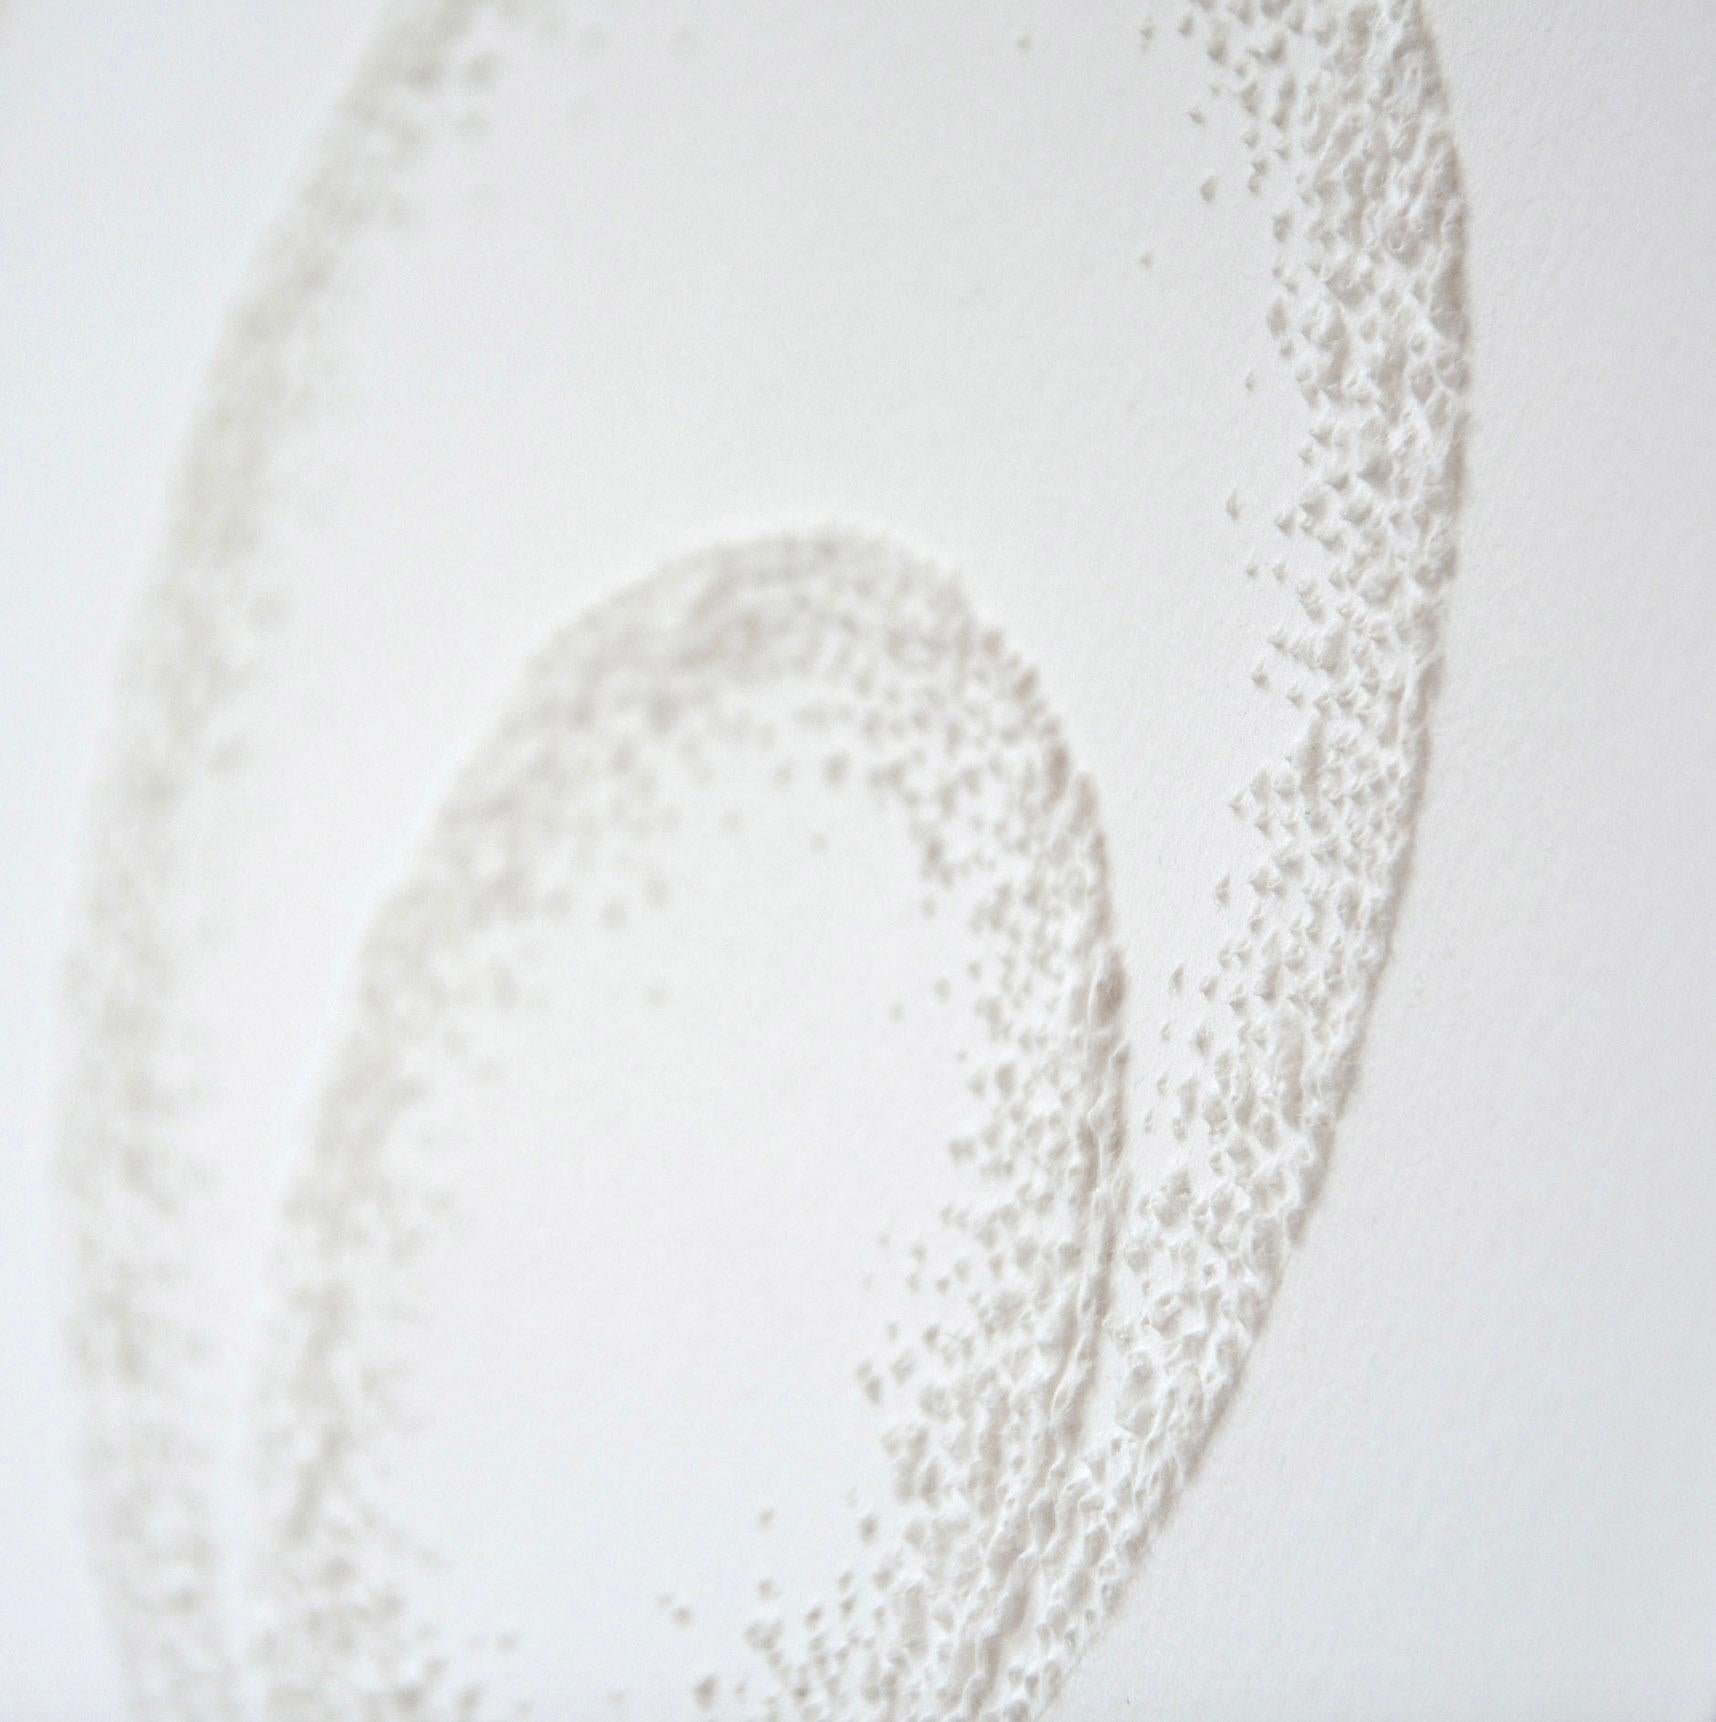 Circle 3 - intricate white 3D abstract geometric drypoint drawing on paper  - Sculpture by Antonin Anzil